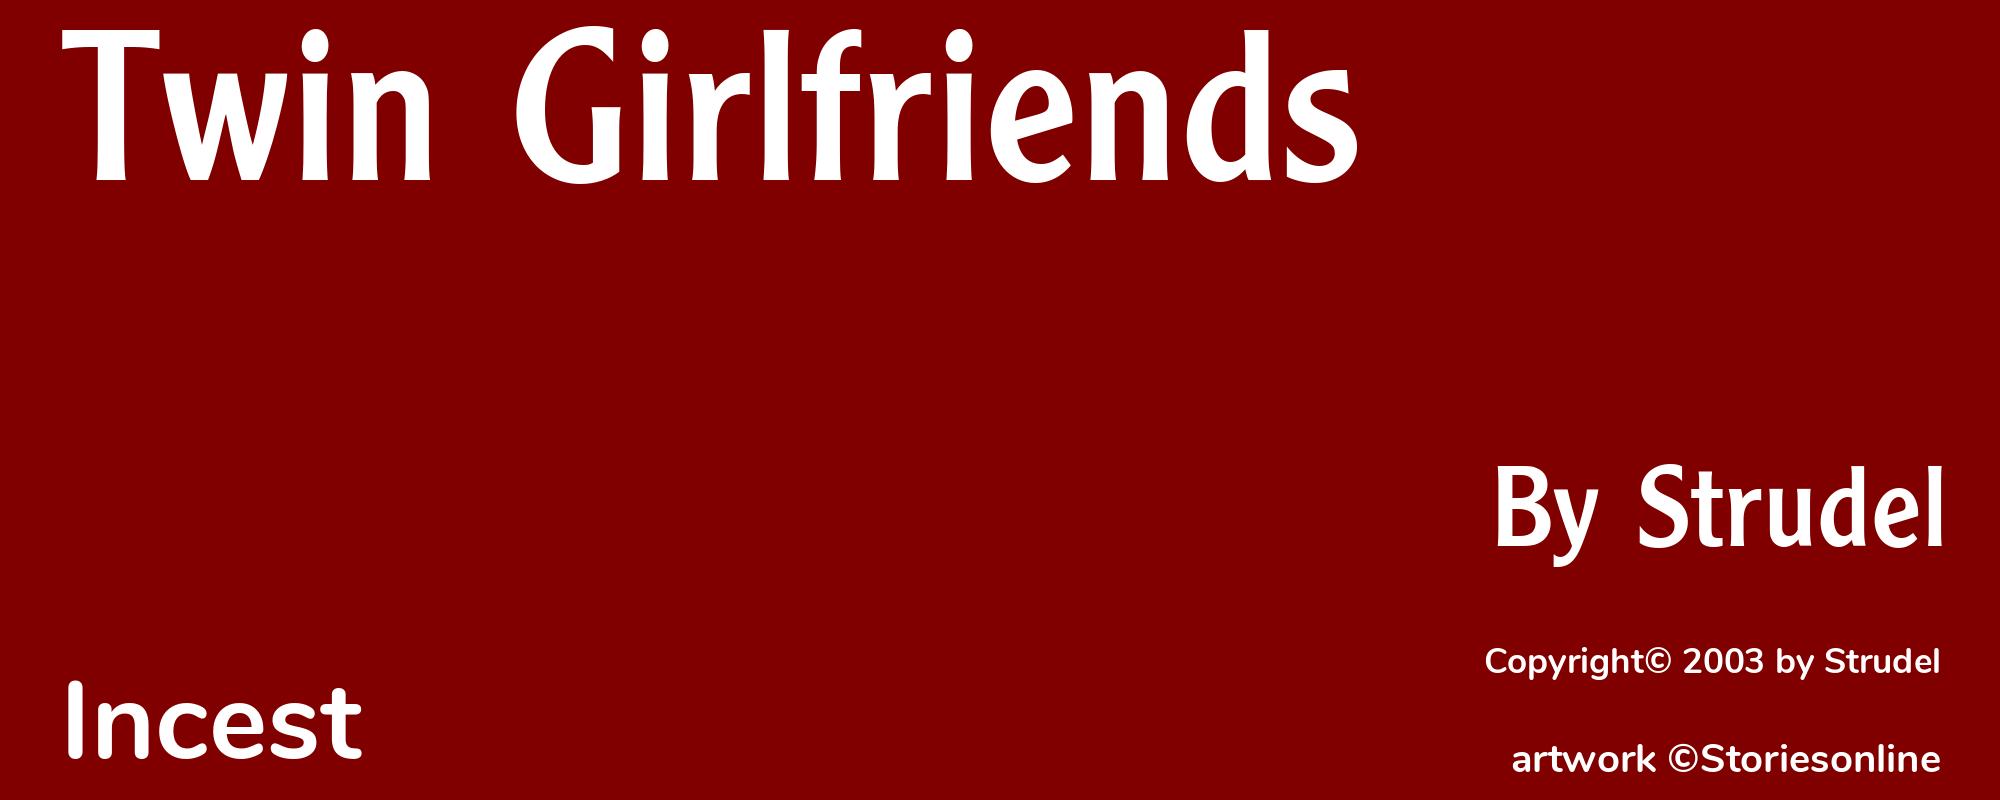 Twin Girlfriends - Cover